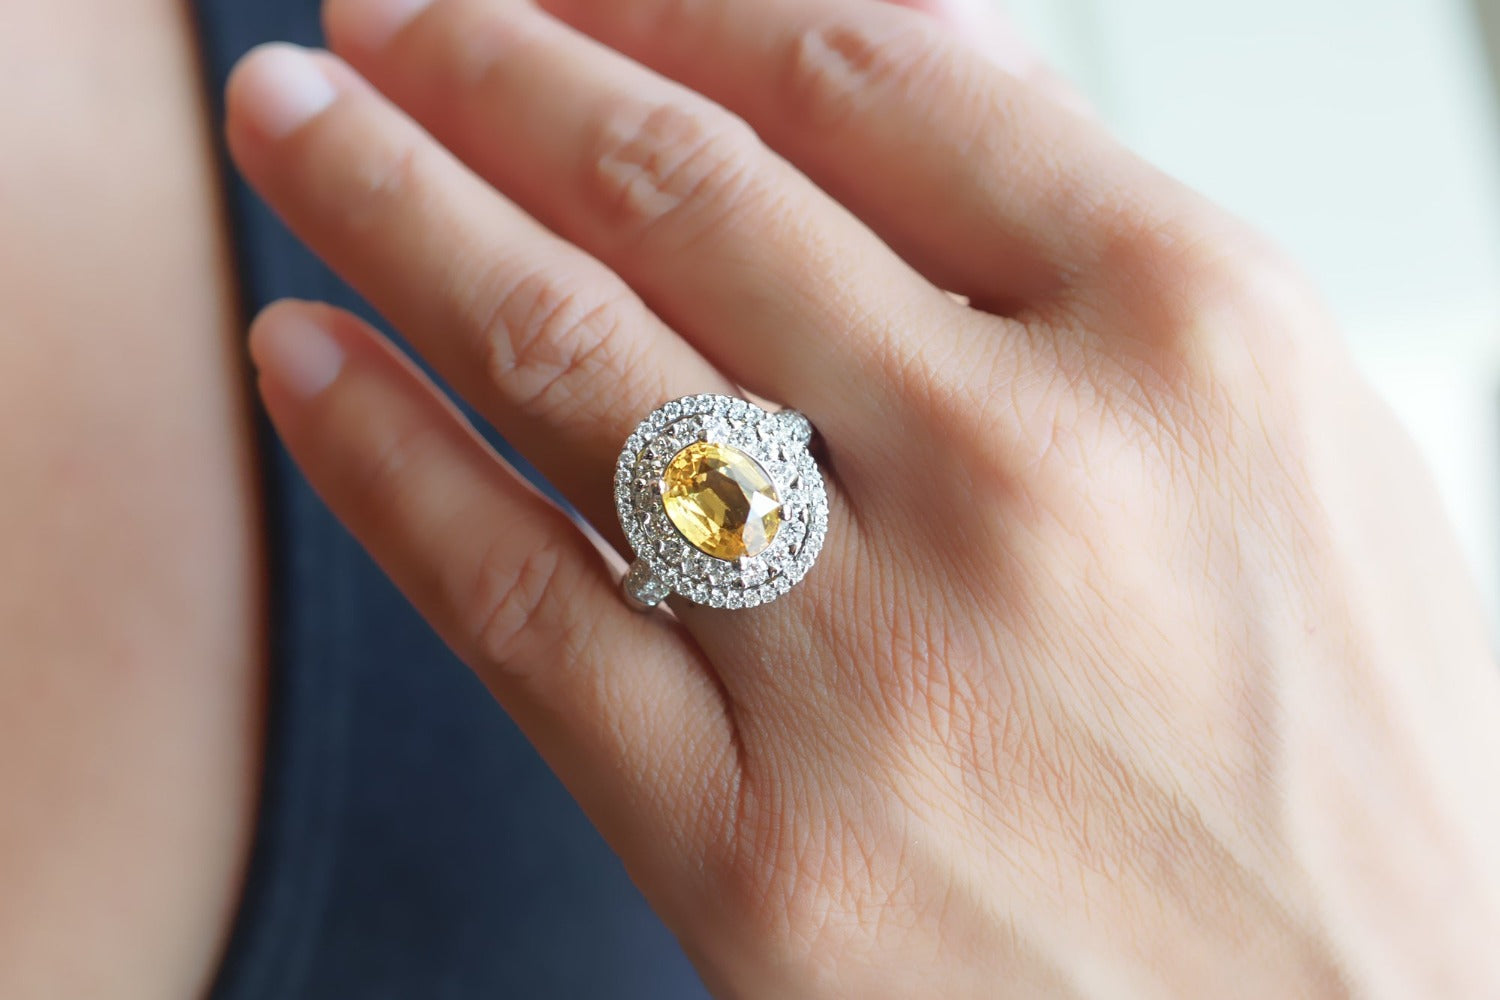 Oval yellow sapphire ring with a double diamond halo on a hand